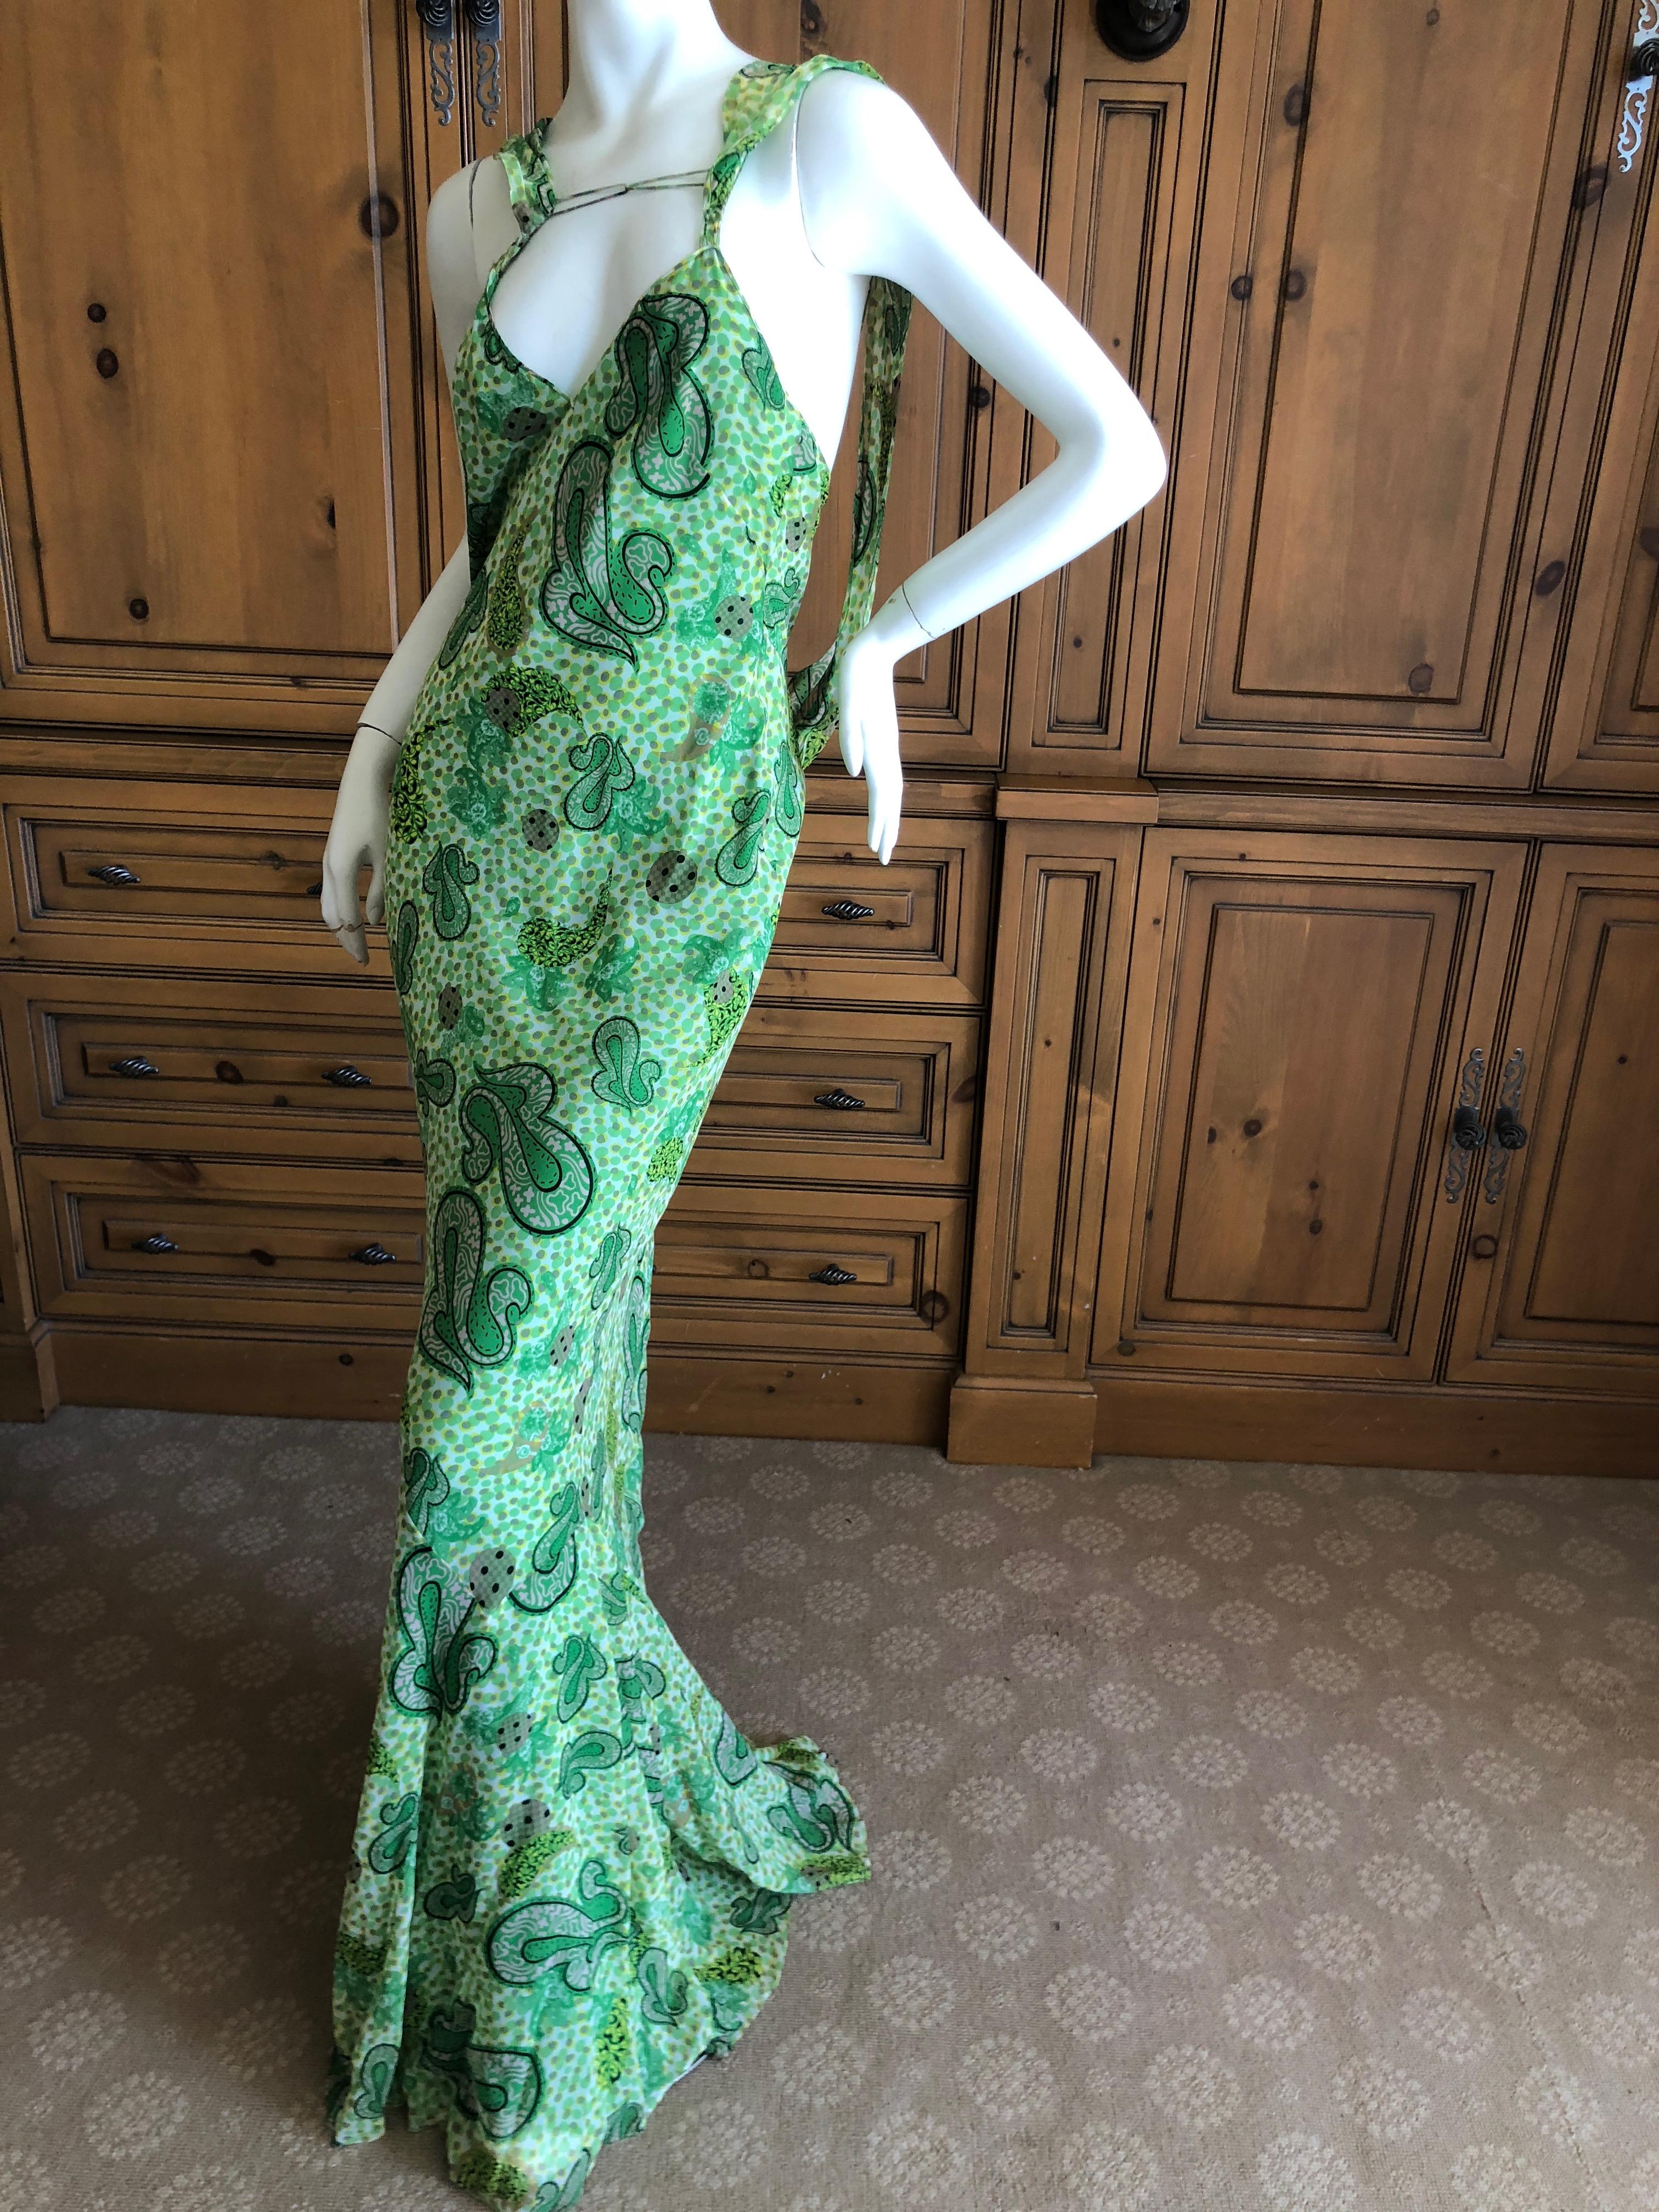 Women's  John Galliano 2002 Green Silk Paisley Ruffled Evening Dress with Low Cowl Back For Sale